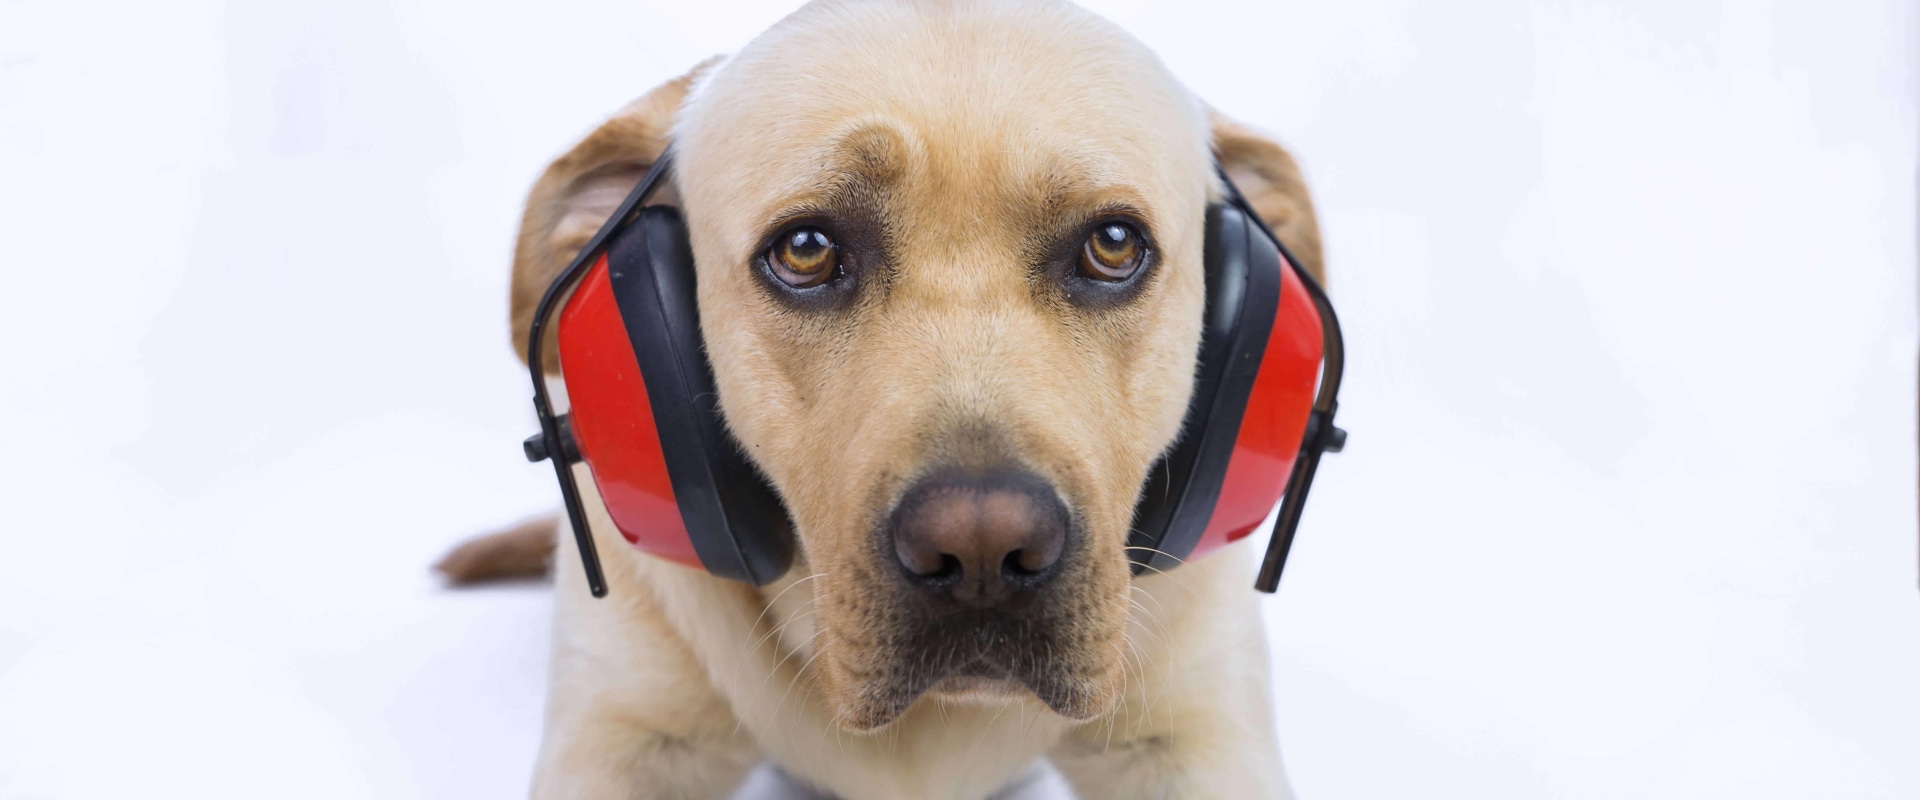 Understanding and Managing a Dog's Fear of Loud Noises and Other Phobias